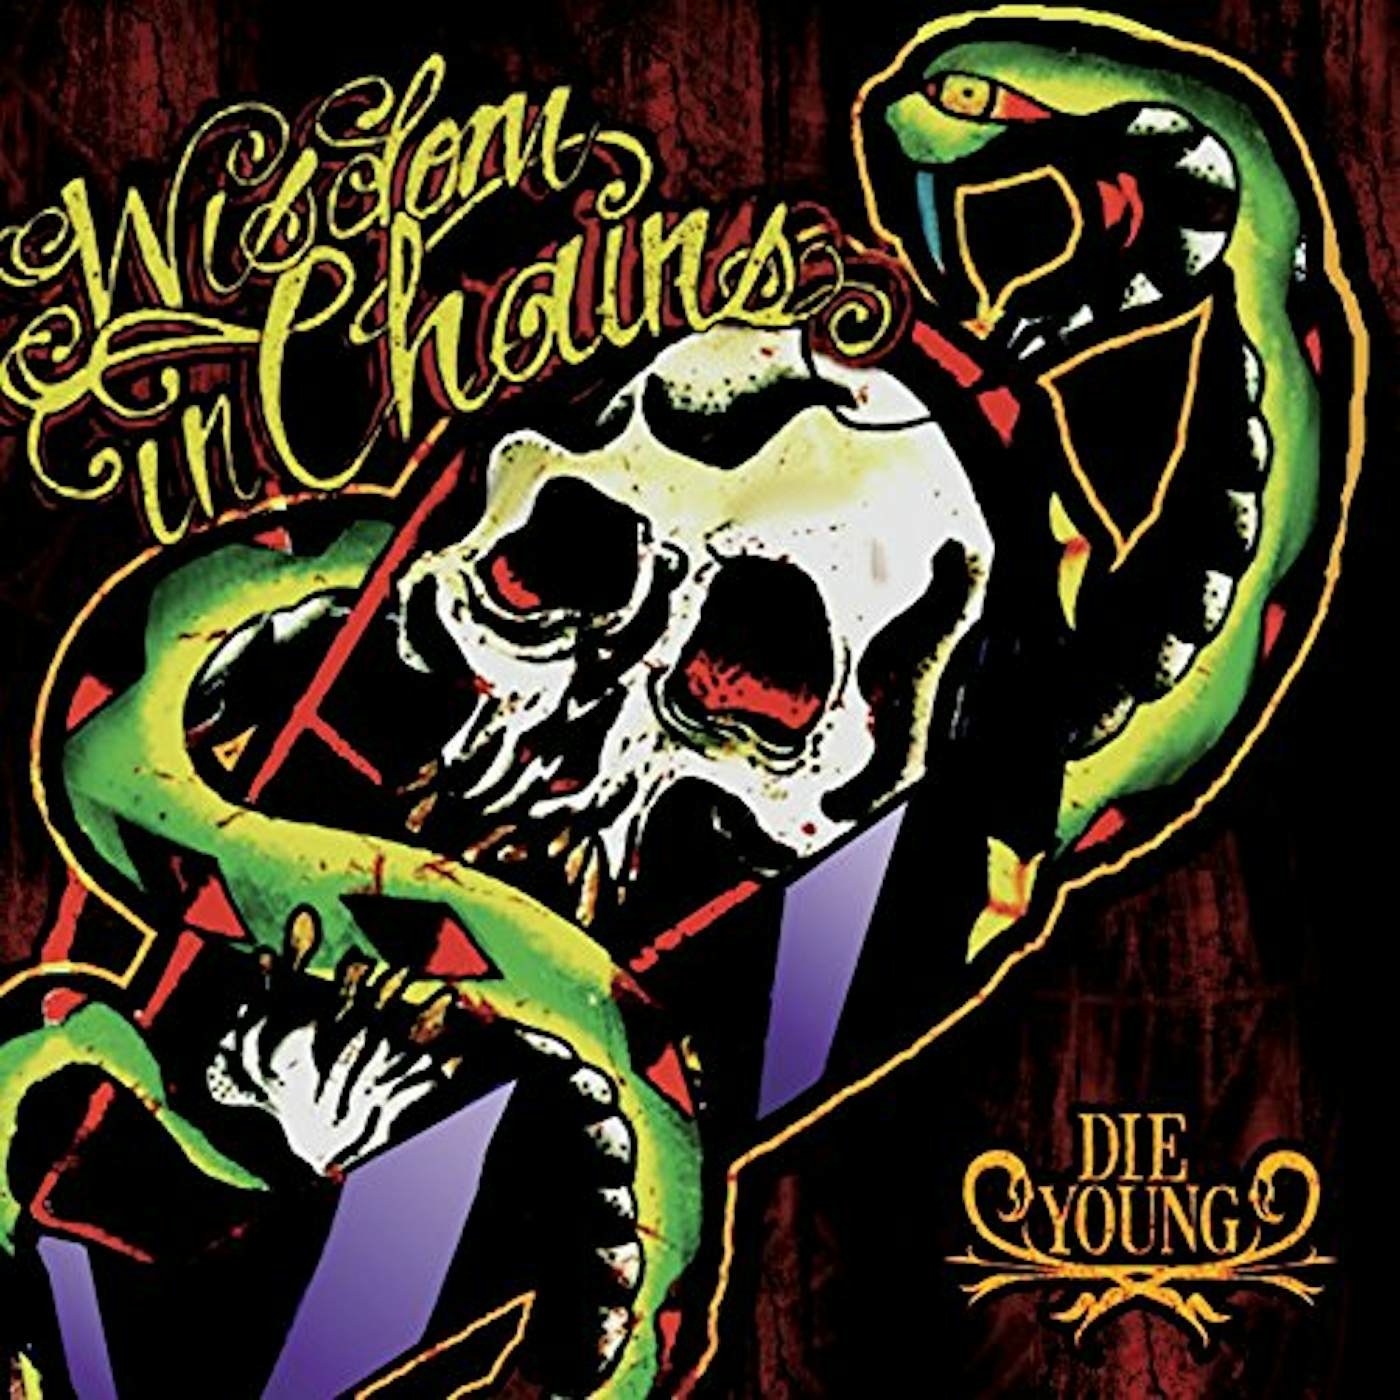 Wisdom In Chains DIE YOUNG (BONUS EDITION) CD